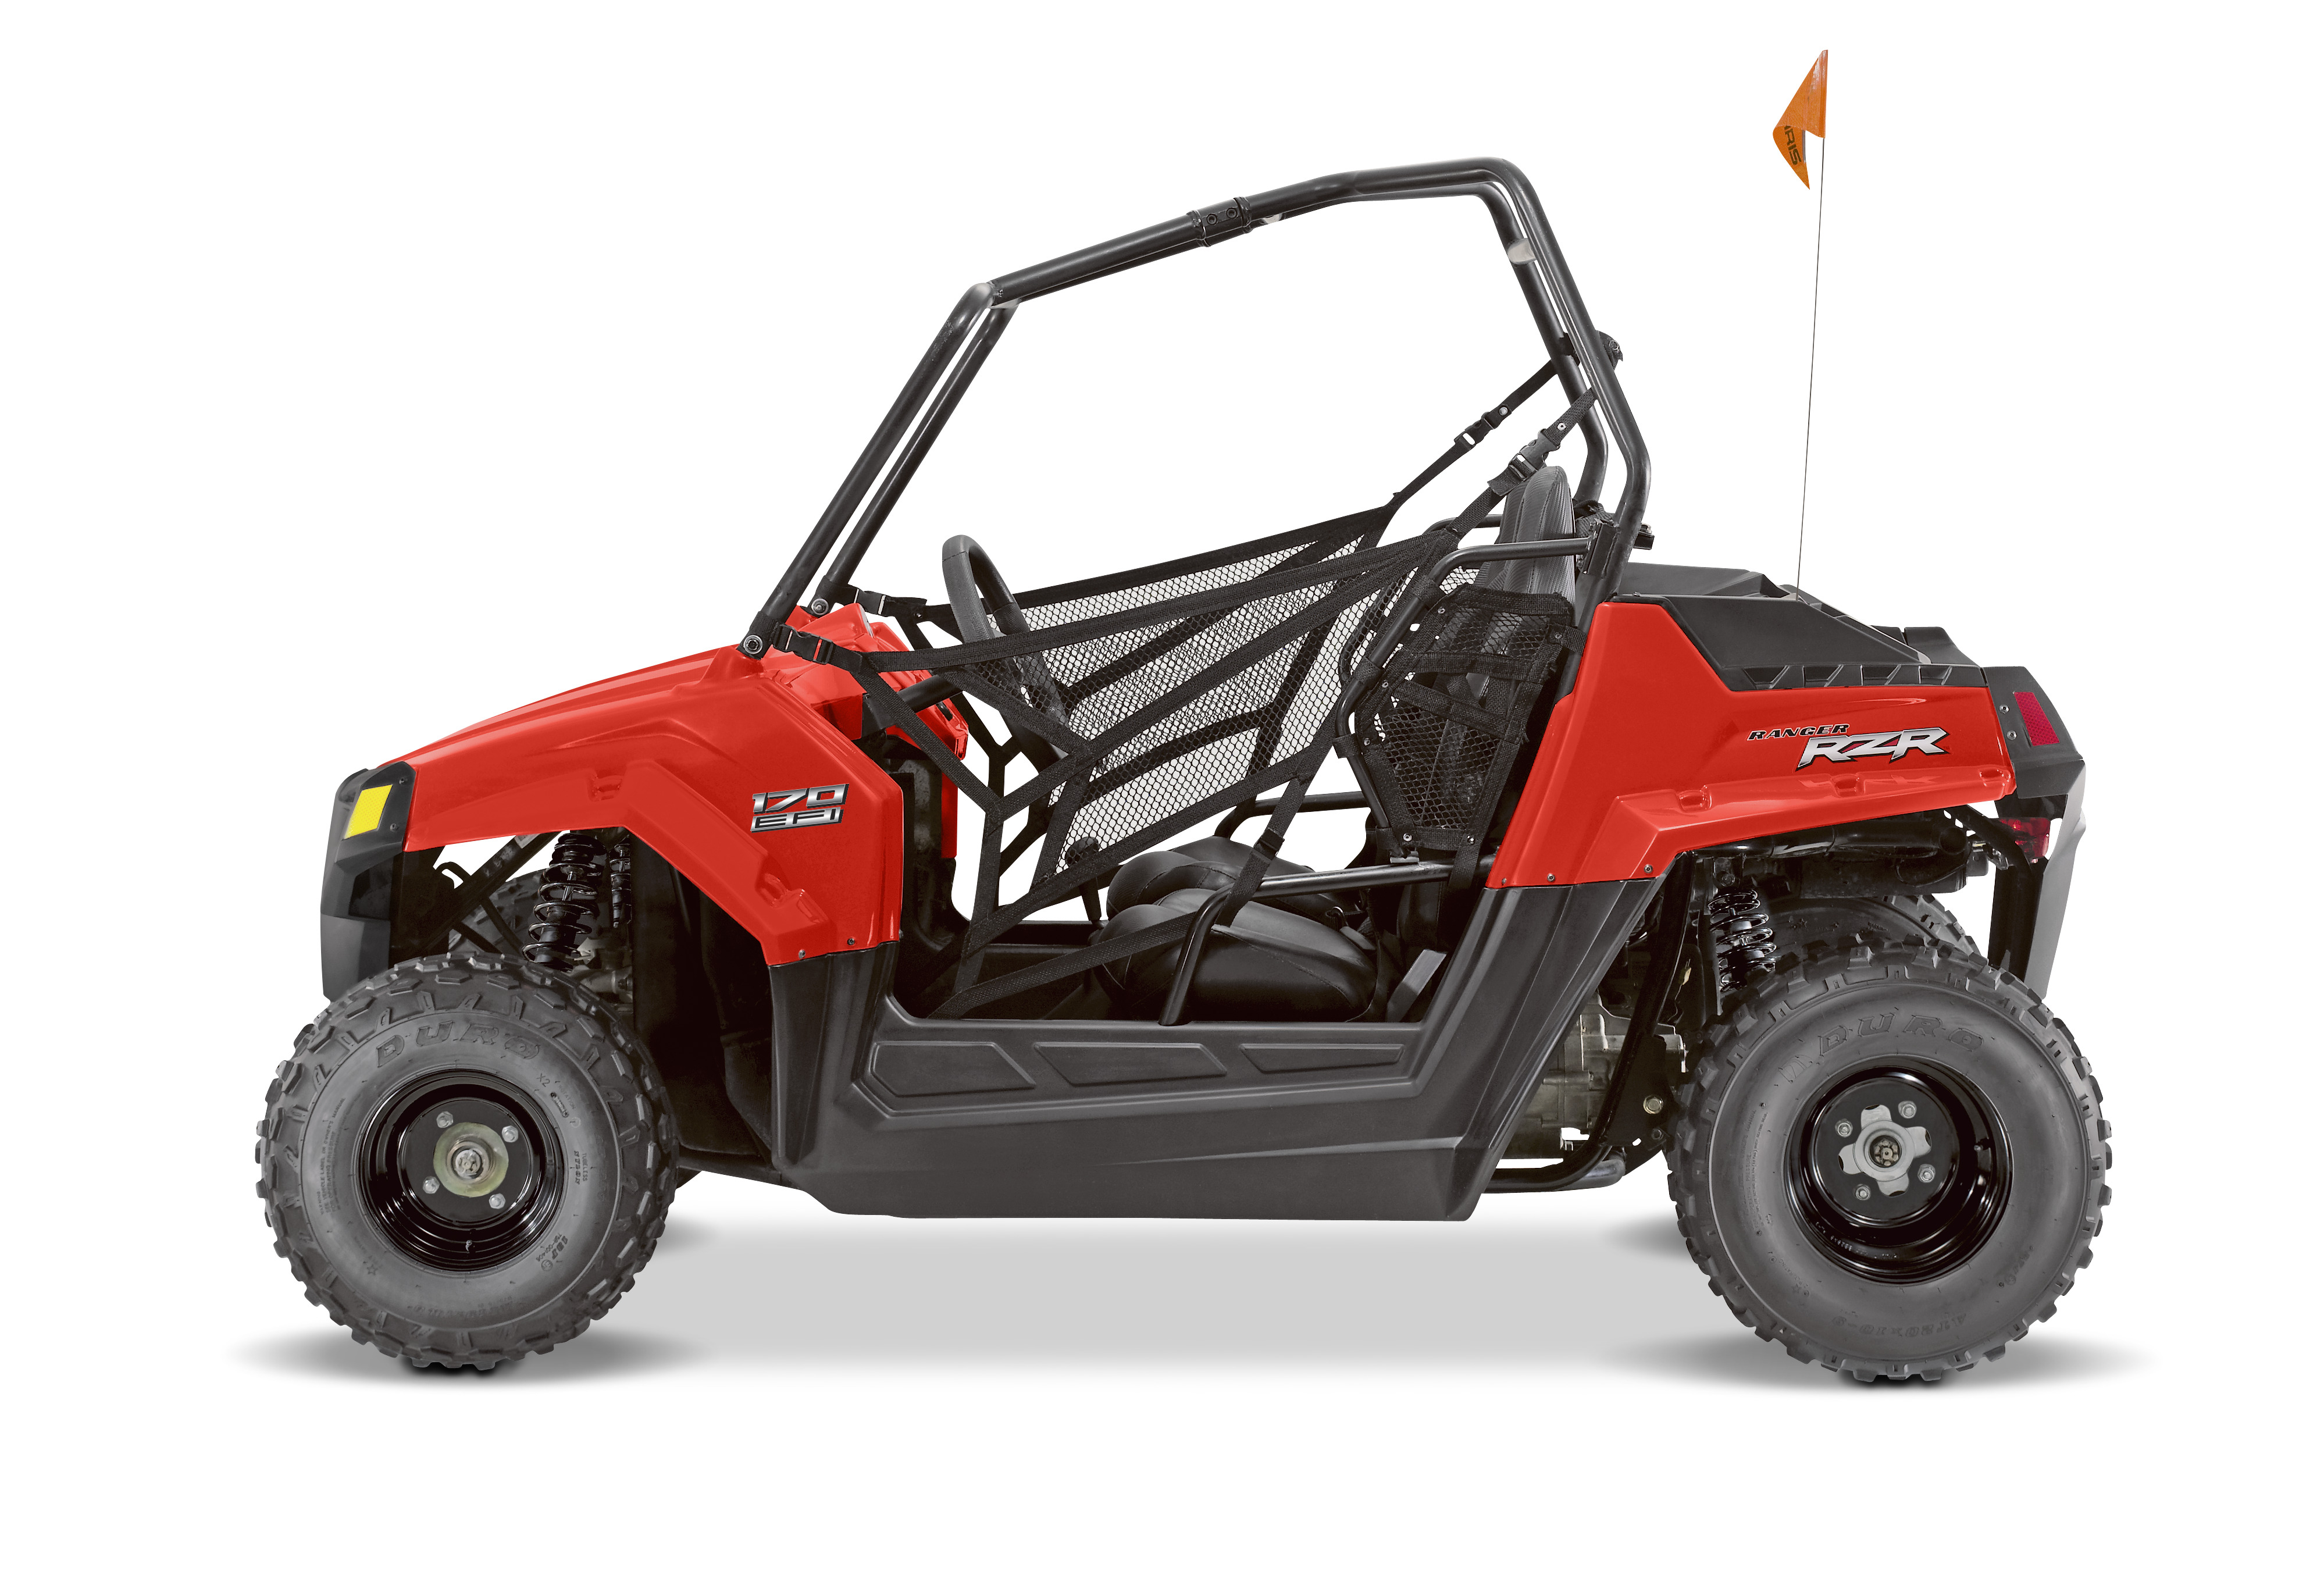 RZR 170 recreational off-highway vehicles (ROVs)